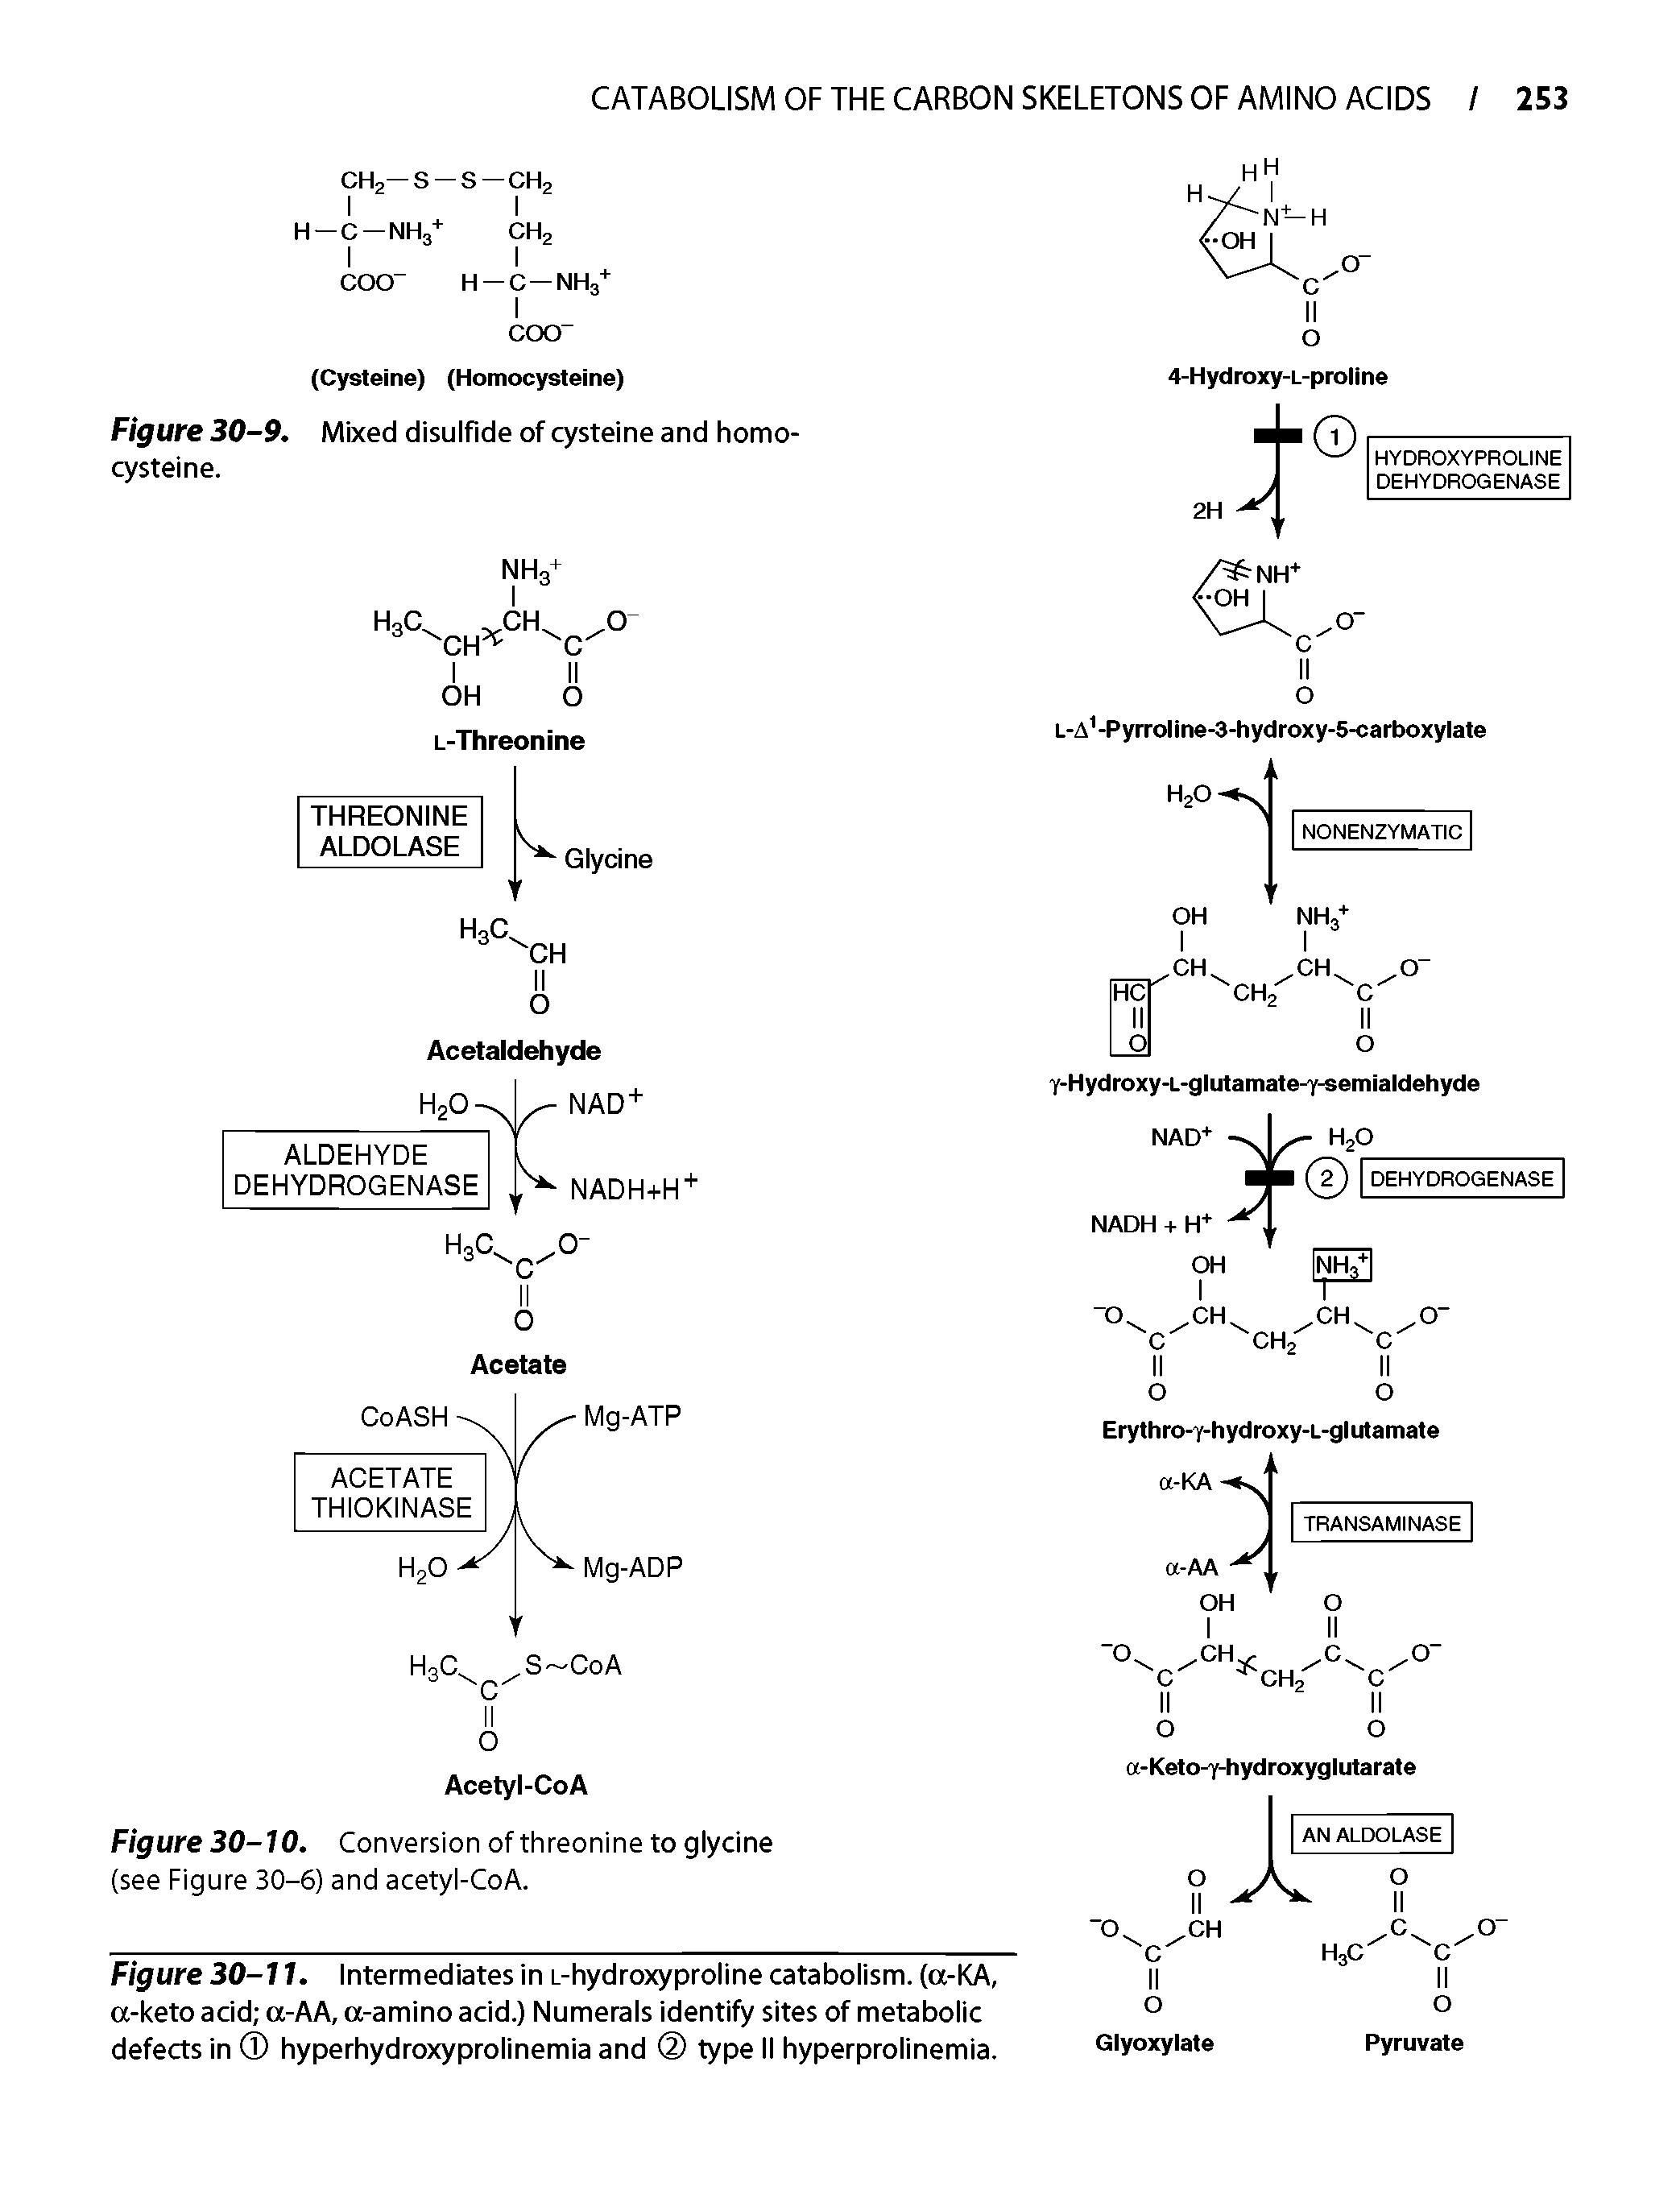 Figure 30-10. Conversion of threonine to glycine (see Figure 30-6) and acetyl-CoA.